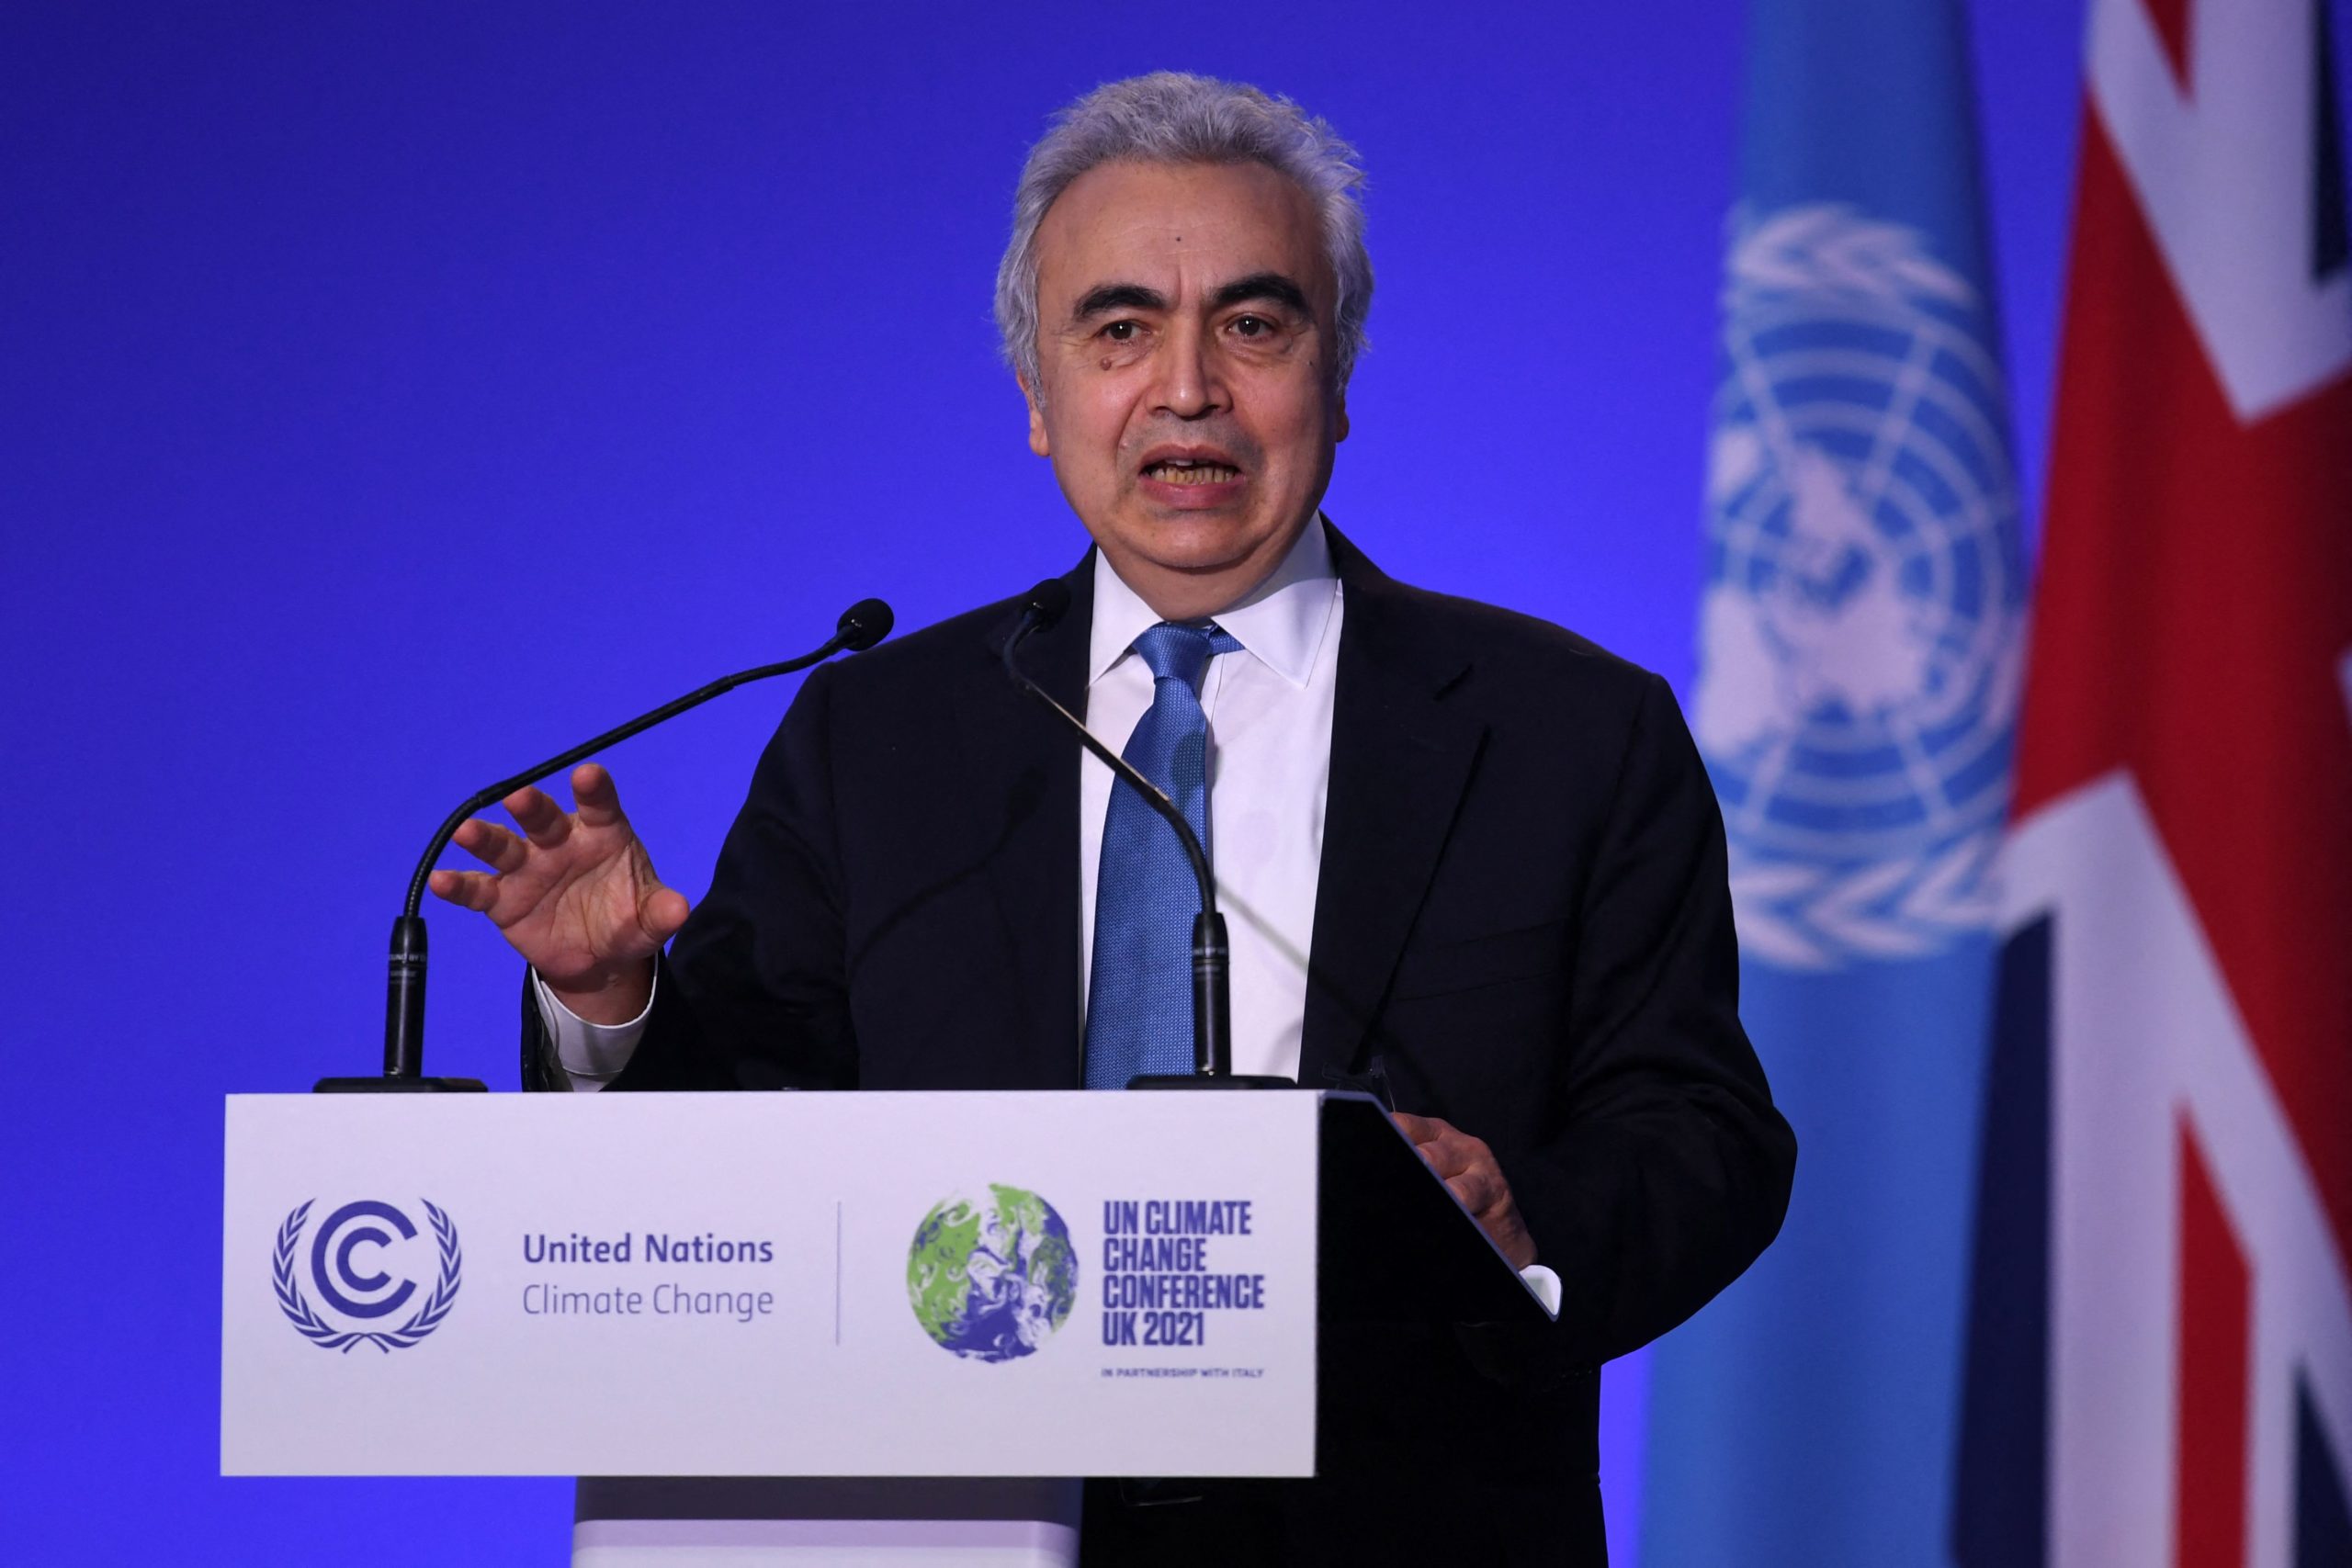 International Energy Agency Executive Director Fatih Birol addresses the COP26 climate summit in Glasgow on Nov. 4. (Daniel Leal/AFP via Getty Images)